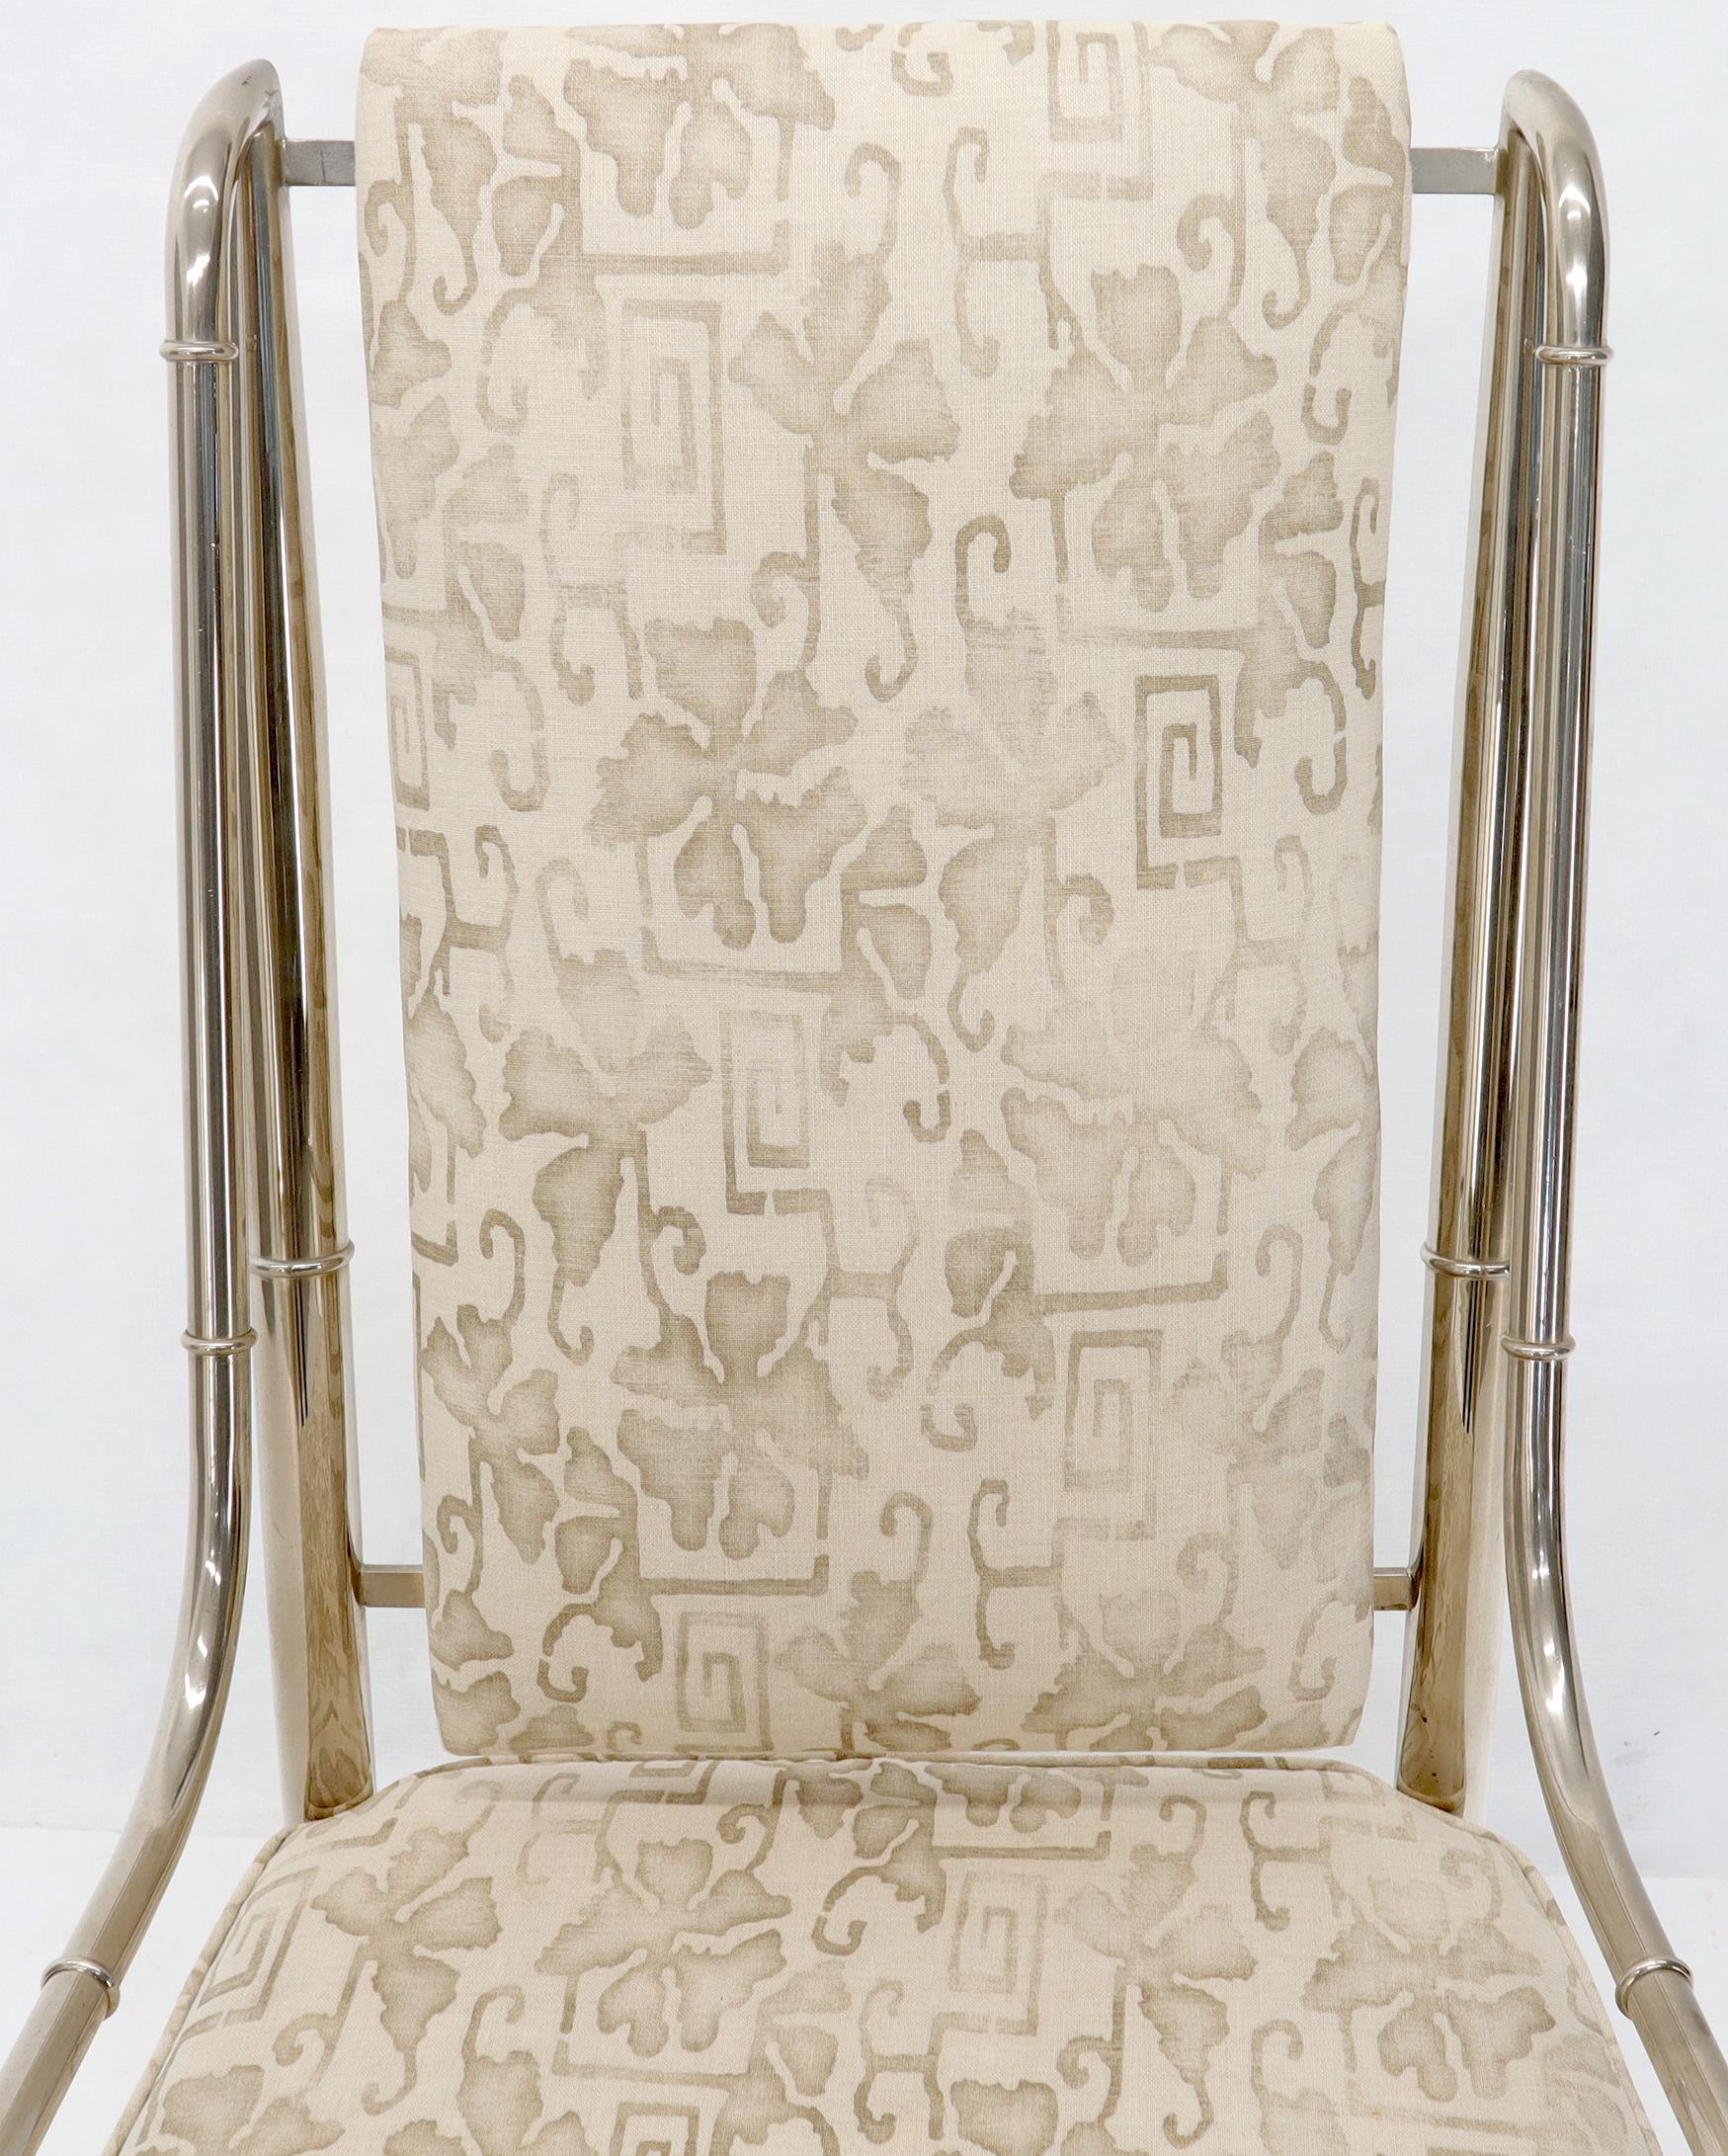 Nickel Imperial Dining Room Chair by Weiman / Warren Lloyd for Mastercraft in Chrome